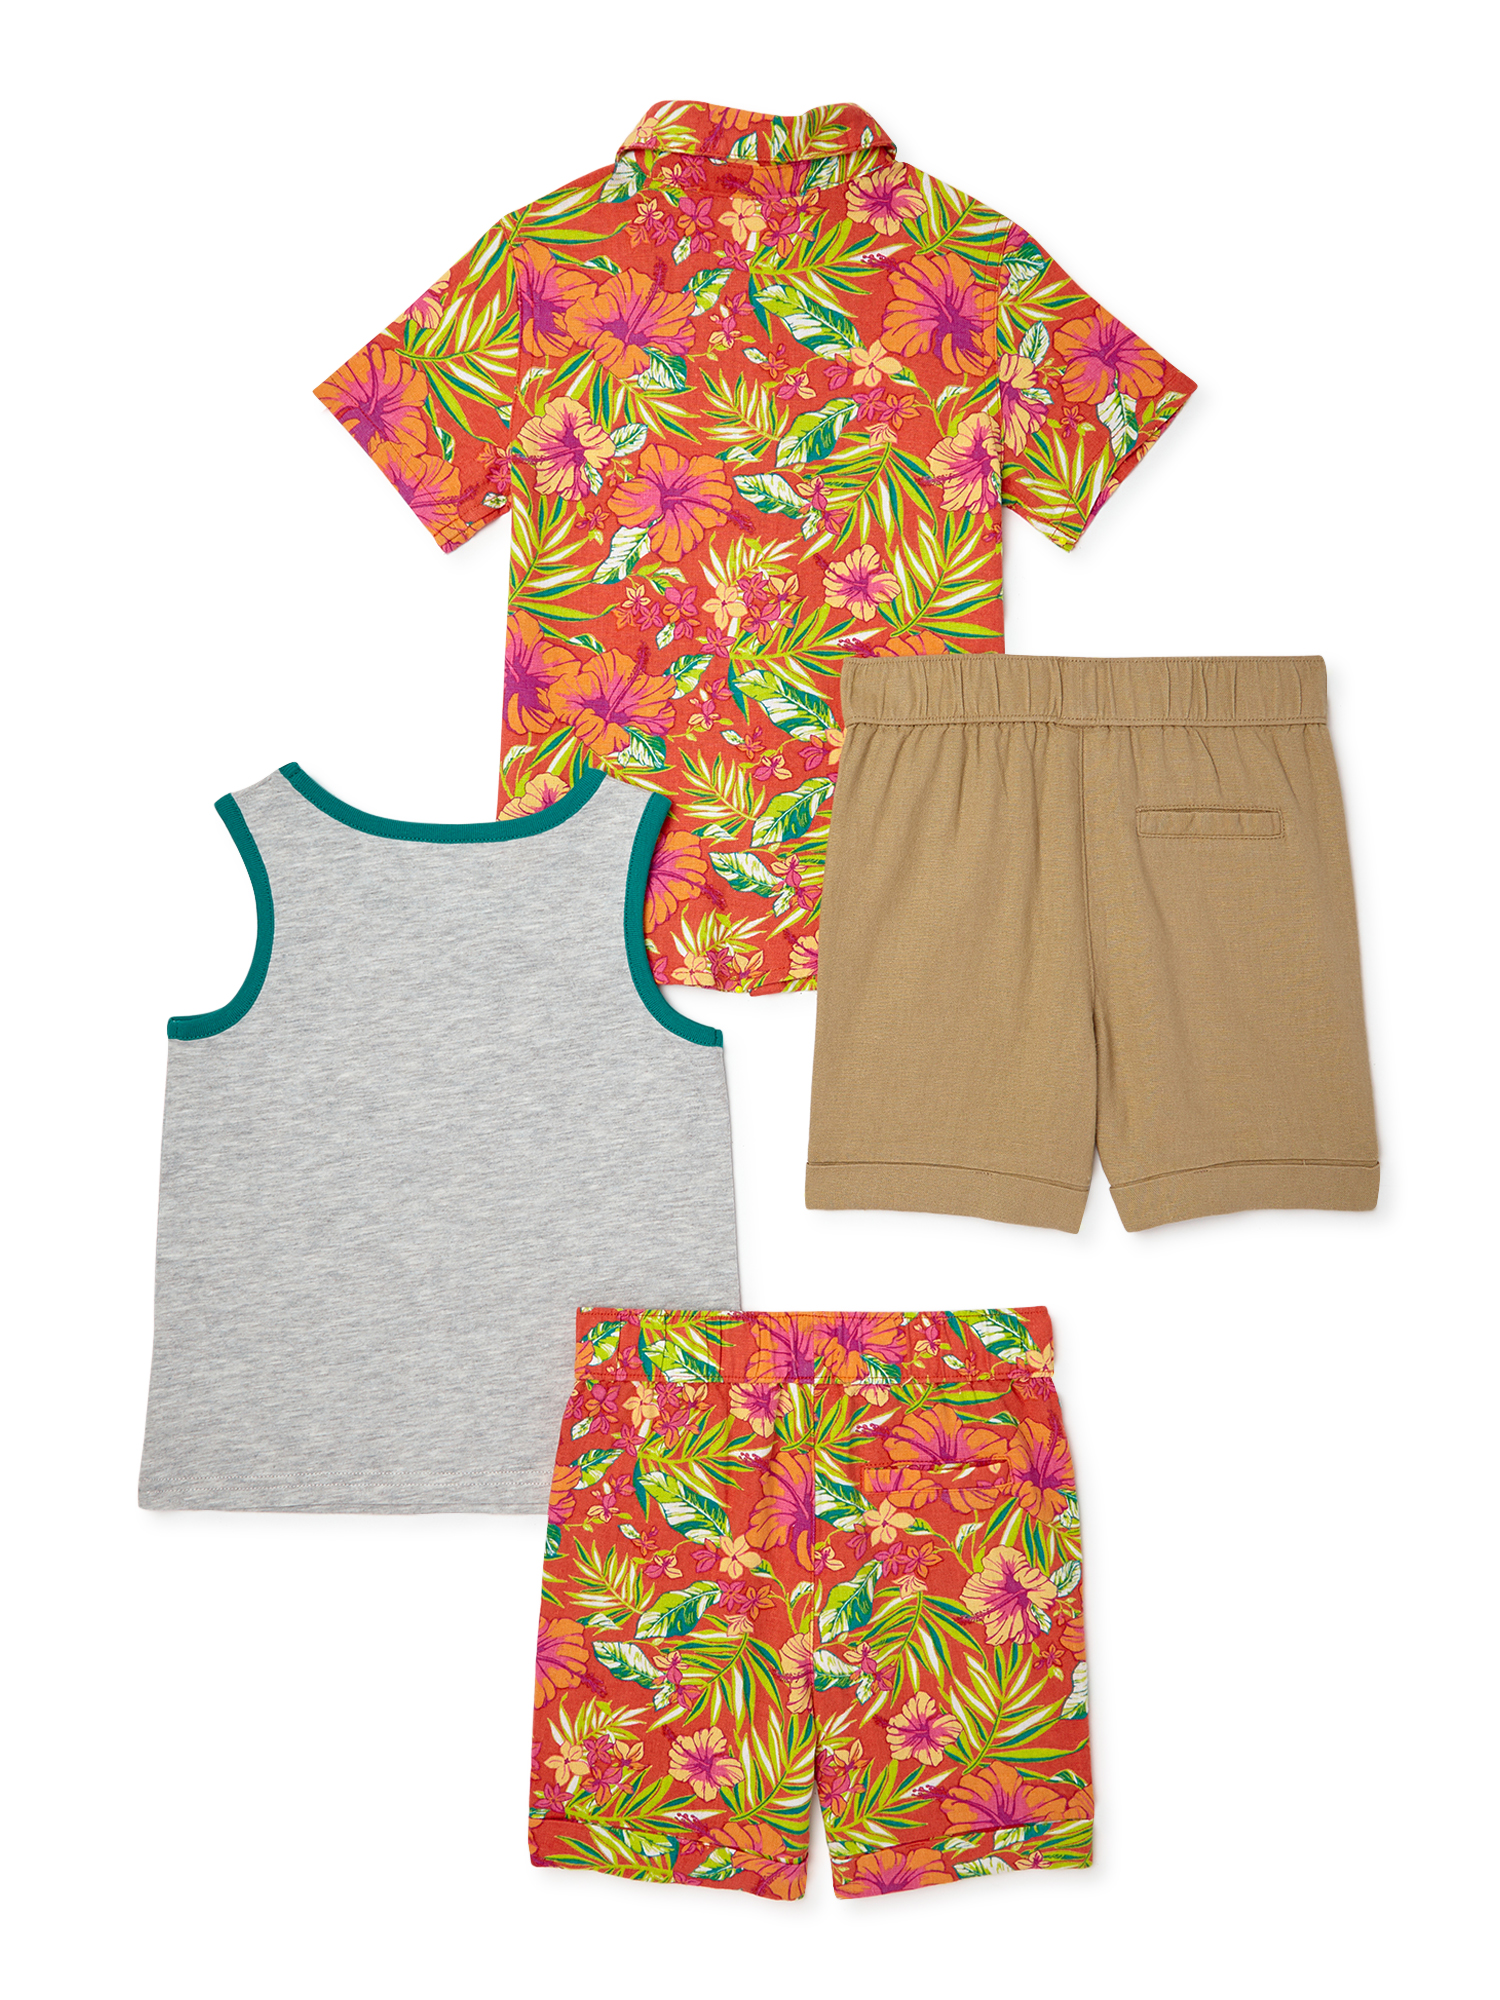 Wonder Nation Baby and Toddler Boy Woven Shirt, Tank, and Shorts Mix and Match Outfit Set, 4-Piece, Sizes 12M-5T - image 3 of 3